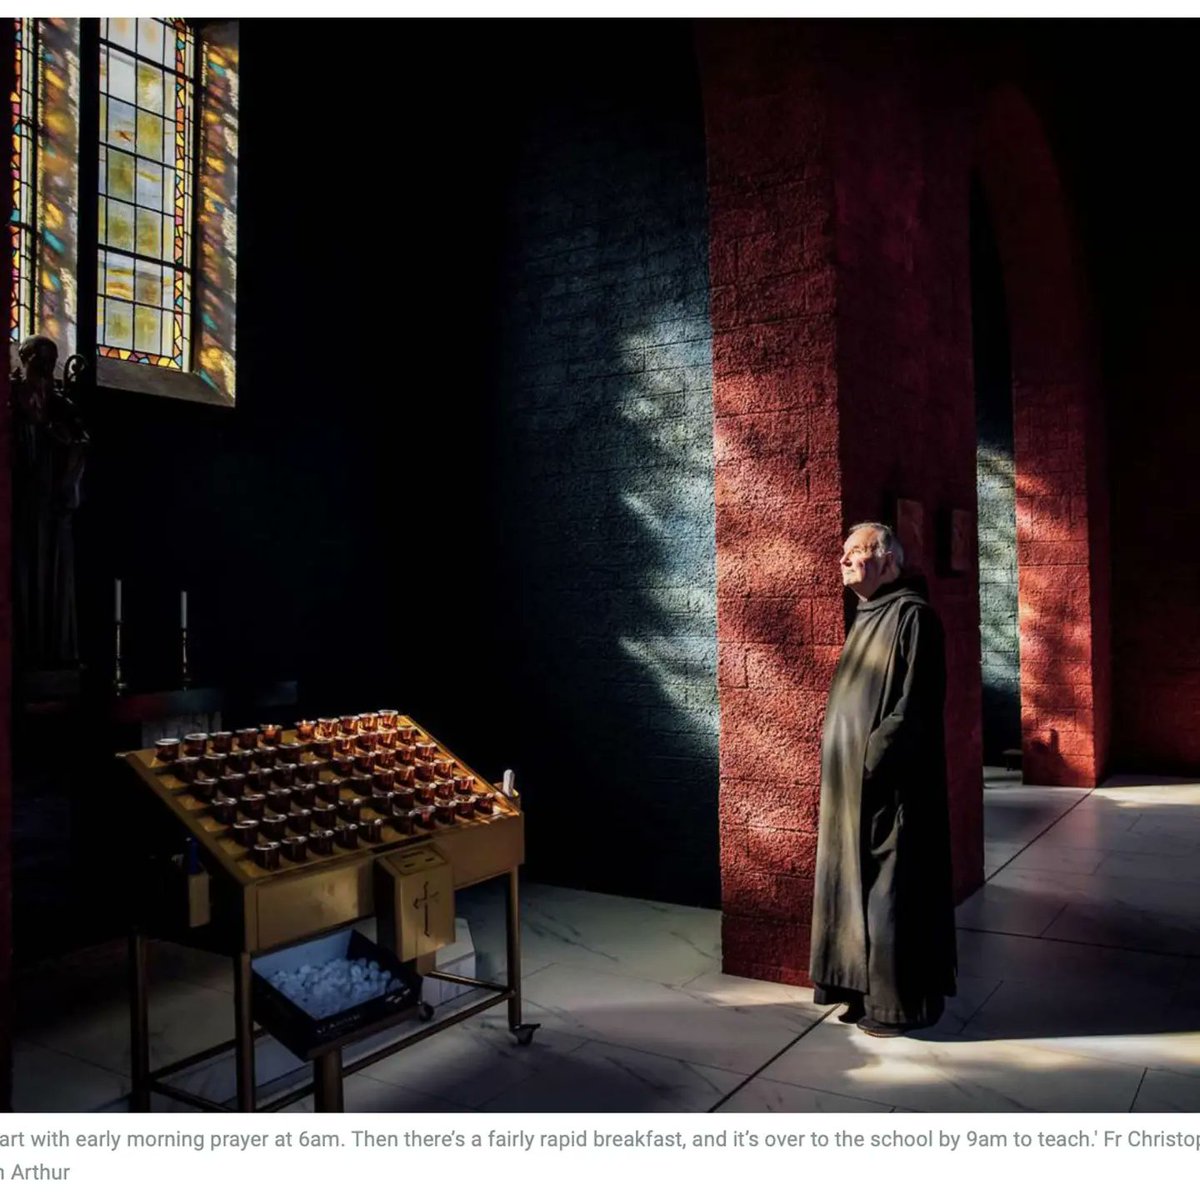 Nice use of images by the @IrishTimes  from a recent shoot with Fr Christopher Dillon in @GlenstalSchool  @GlenstalAbbey
Fr Christopher, one of Ireland's last Latin teachers, who after 50 years serving as a monk , says he is ready to retire.